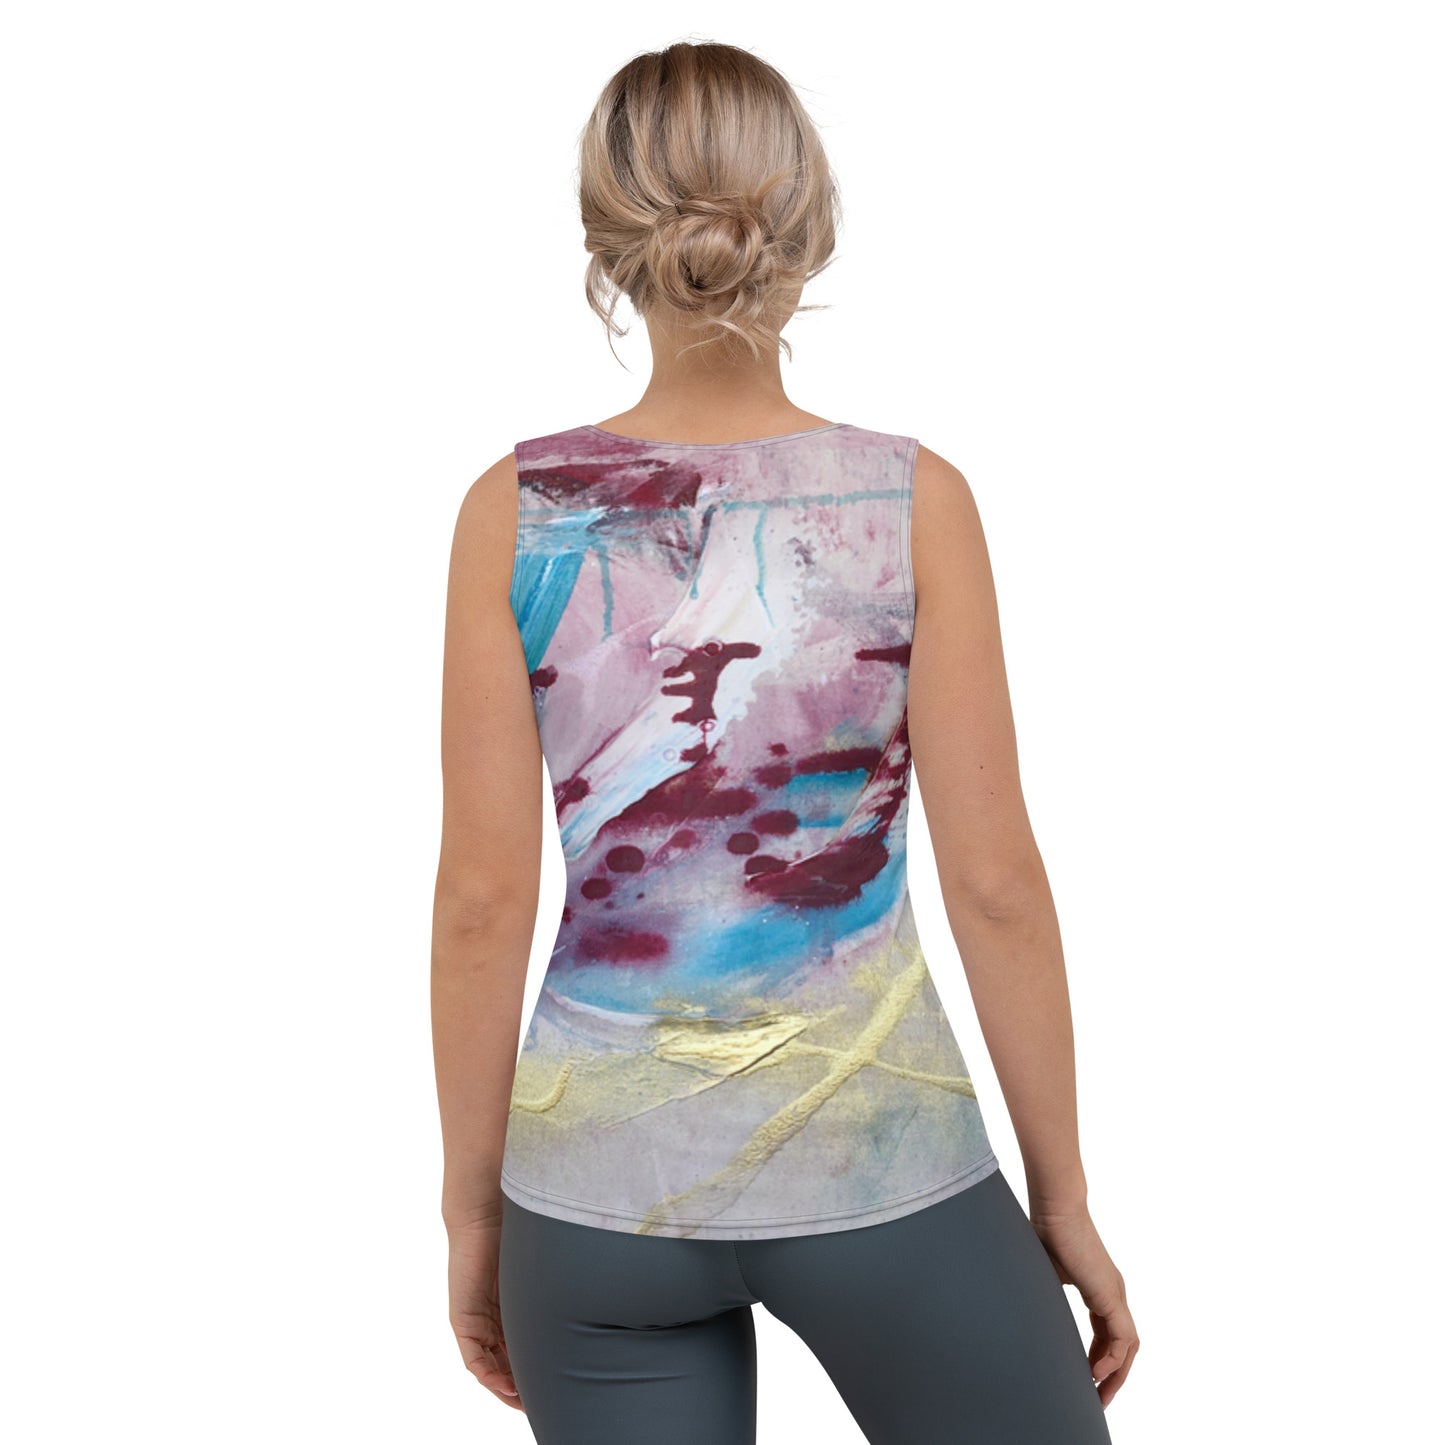 "Cotton Candy Paradise" Womens body-hugging tank top